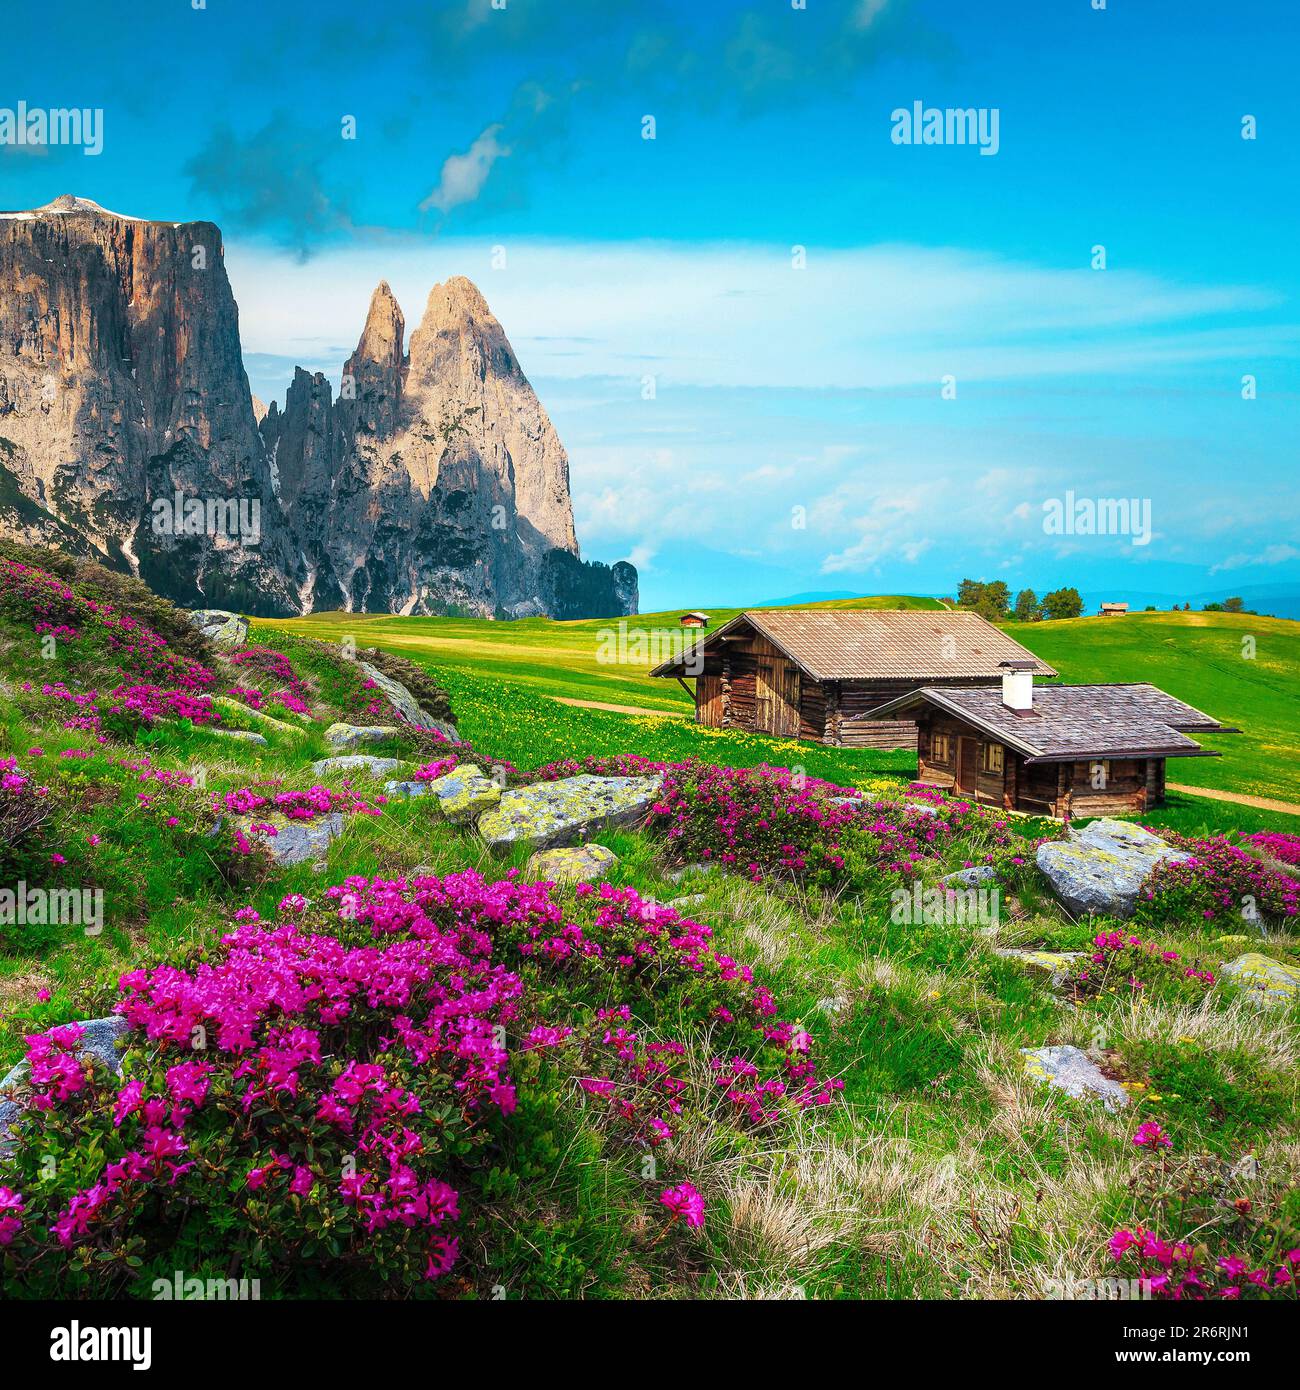 Blooming pink rhododendron flowers and cozy wooden chalets on the green slopes, Dolomites, Italy, Europe Stock Photo